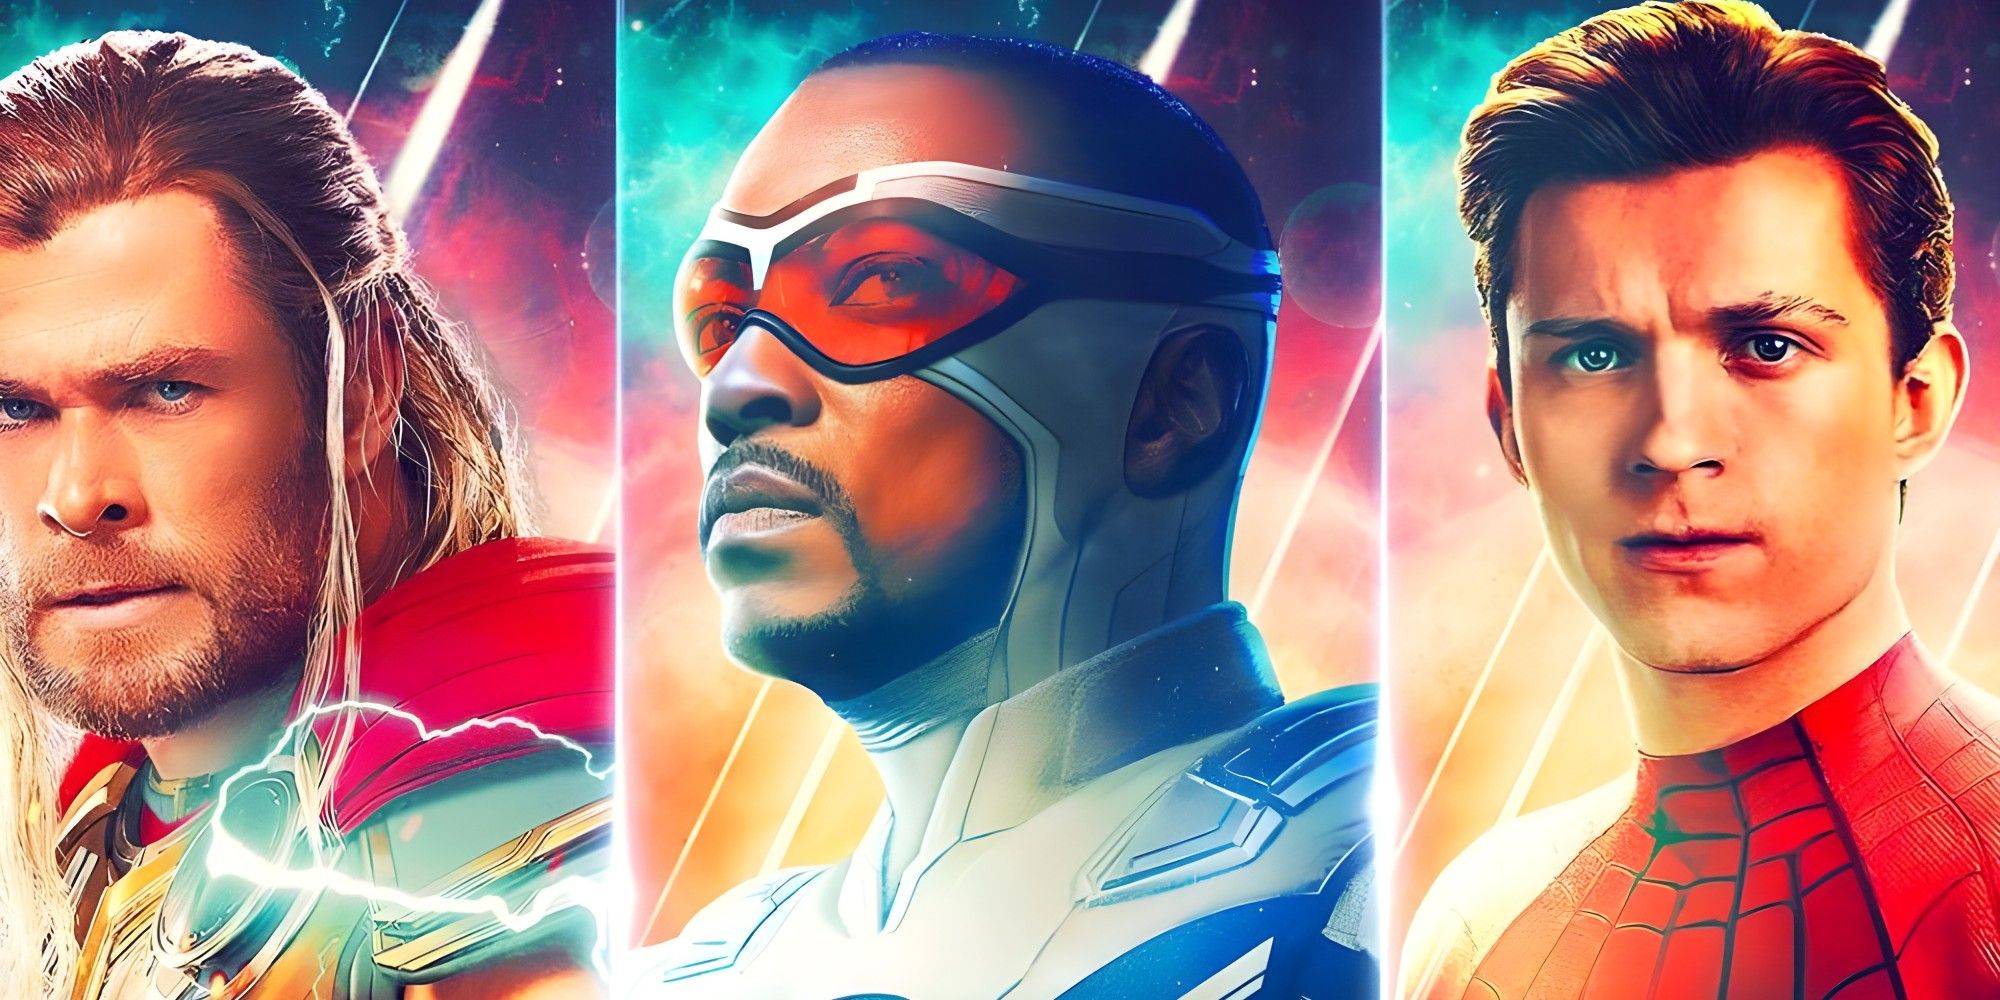 Time To Reassemble”: MCU Fan Poster Series Imagines Avengers 5's New Team